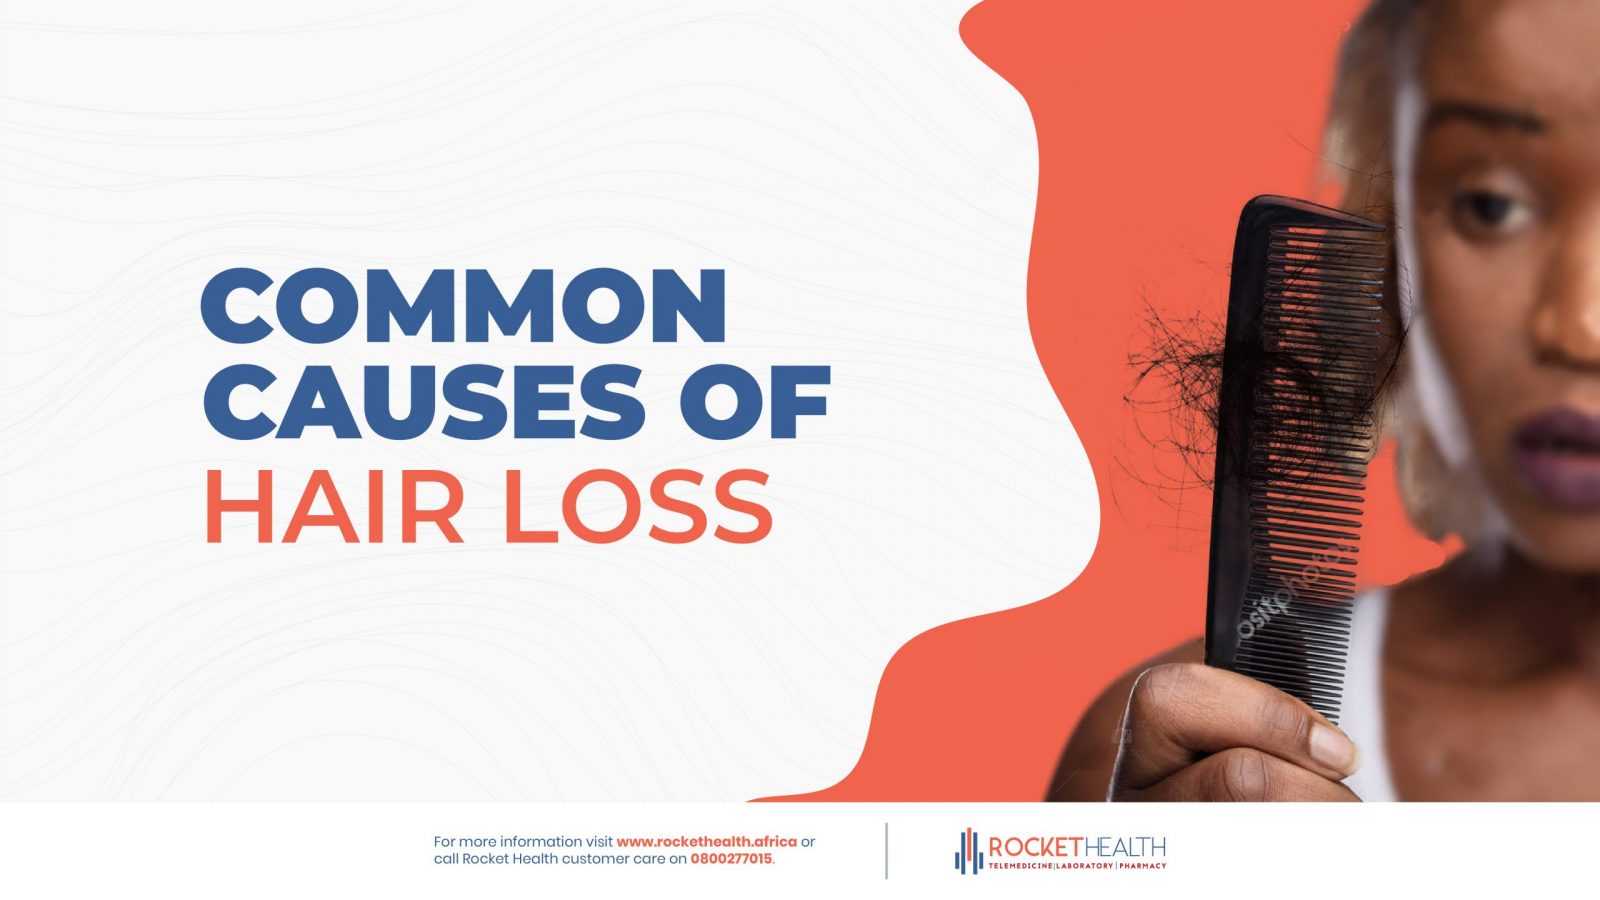 Common causes of hair loss